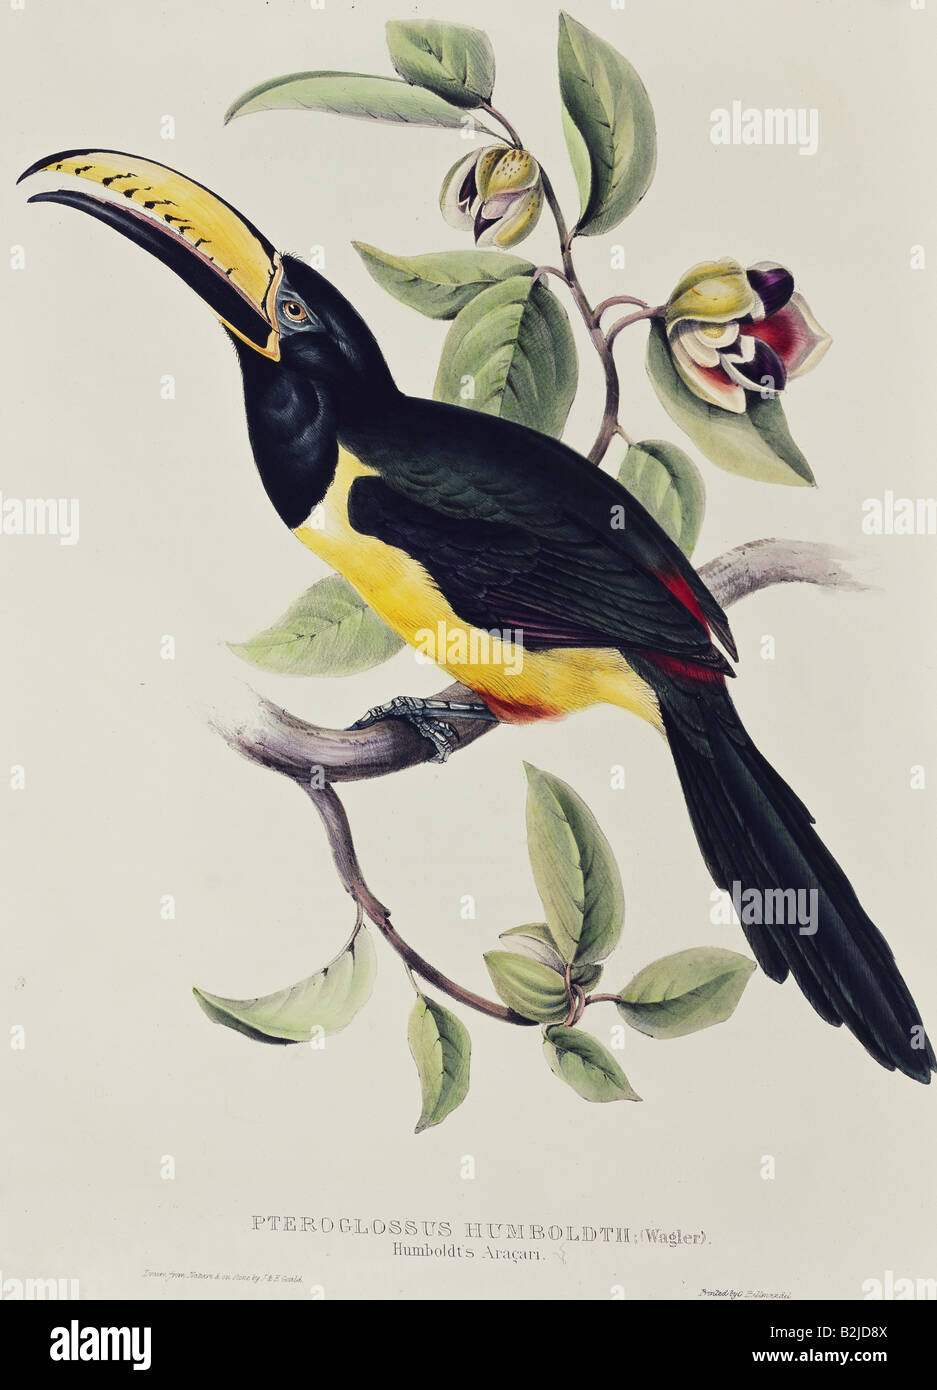 zoology, avian / bird, Toucan (pteroglossus humboldt), lithograph by  Edward Lear, 'Illustrations of the Family of Psittacidae', London, 1831 - 1833, private collection, , Stock Photo